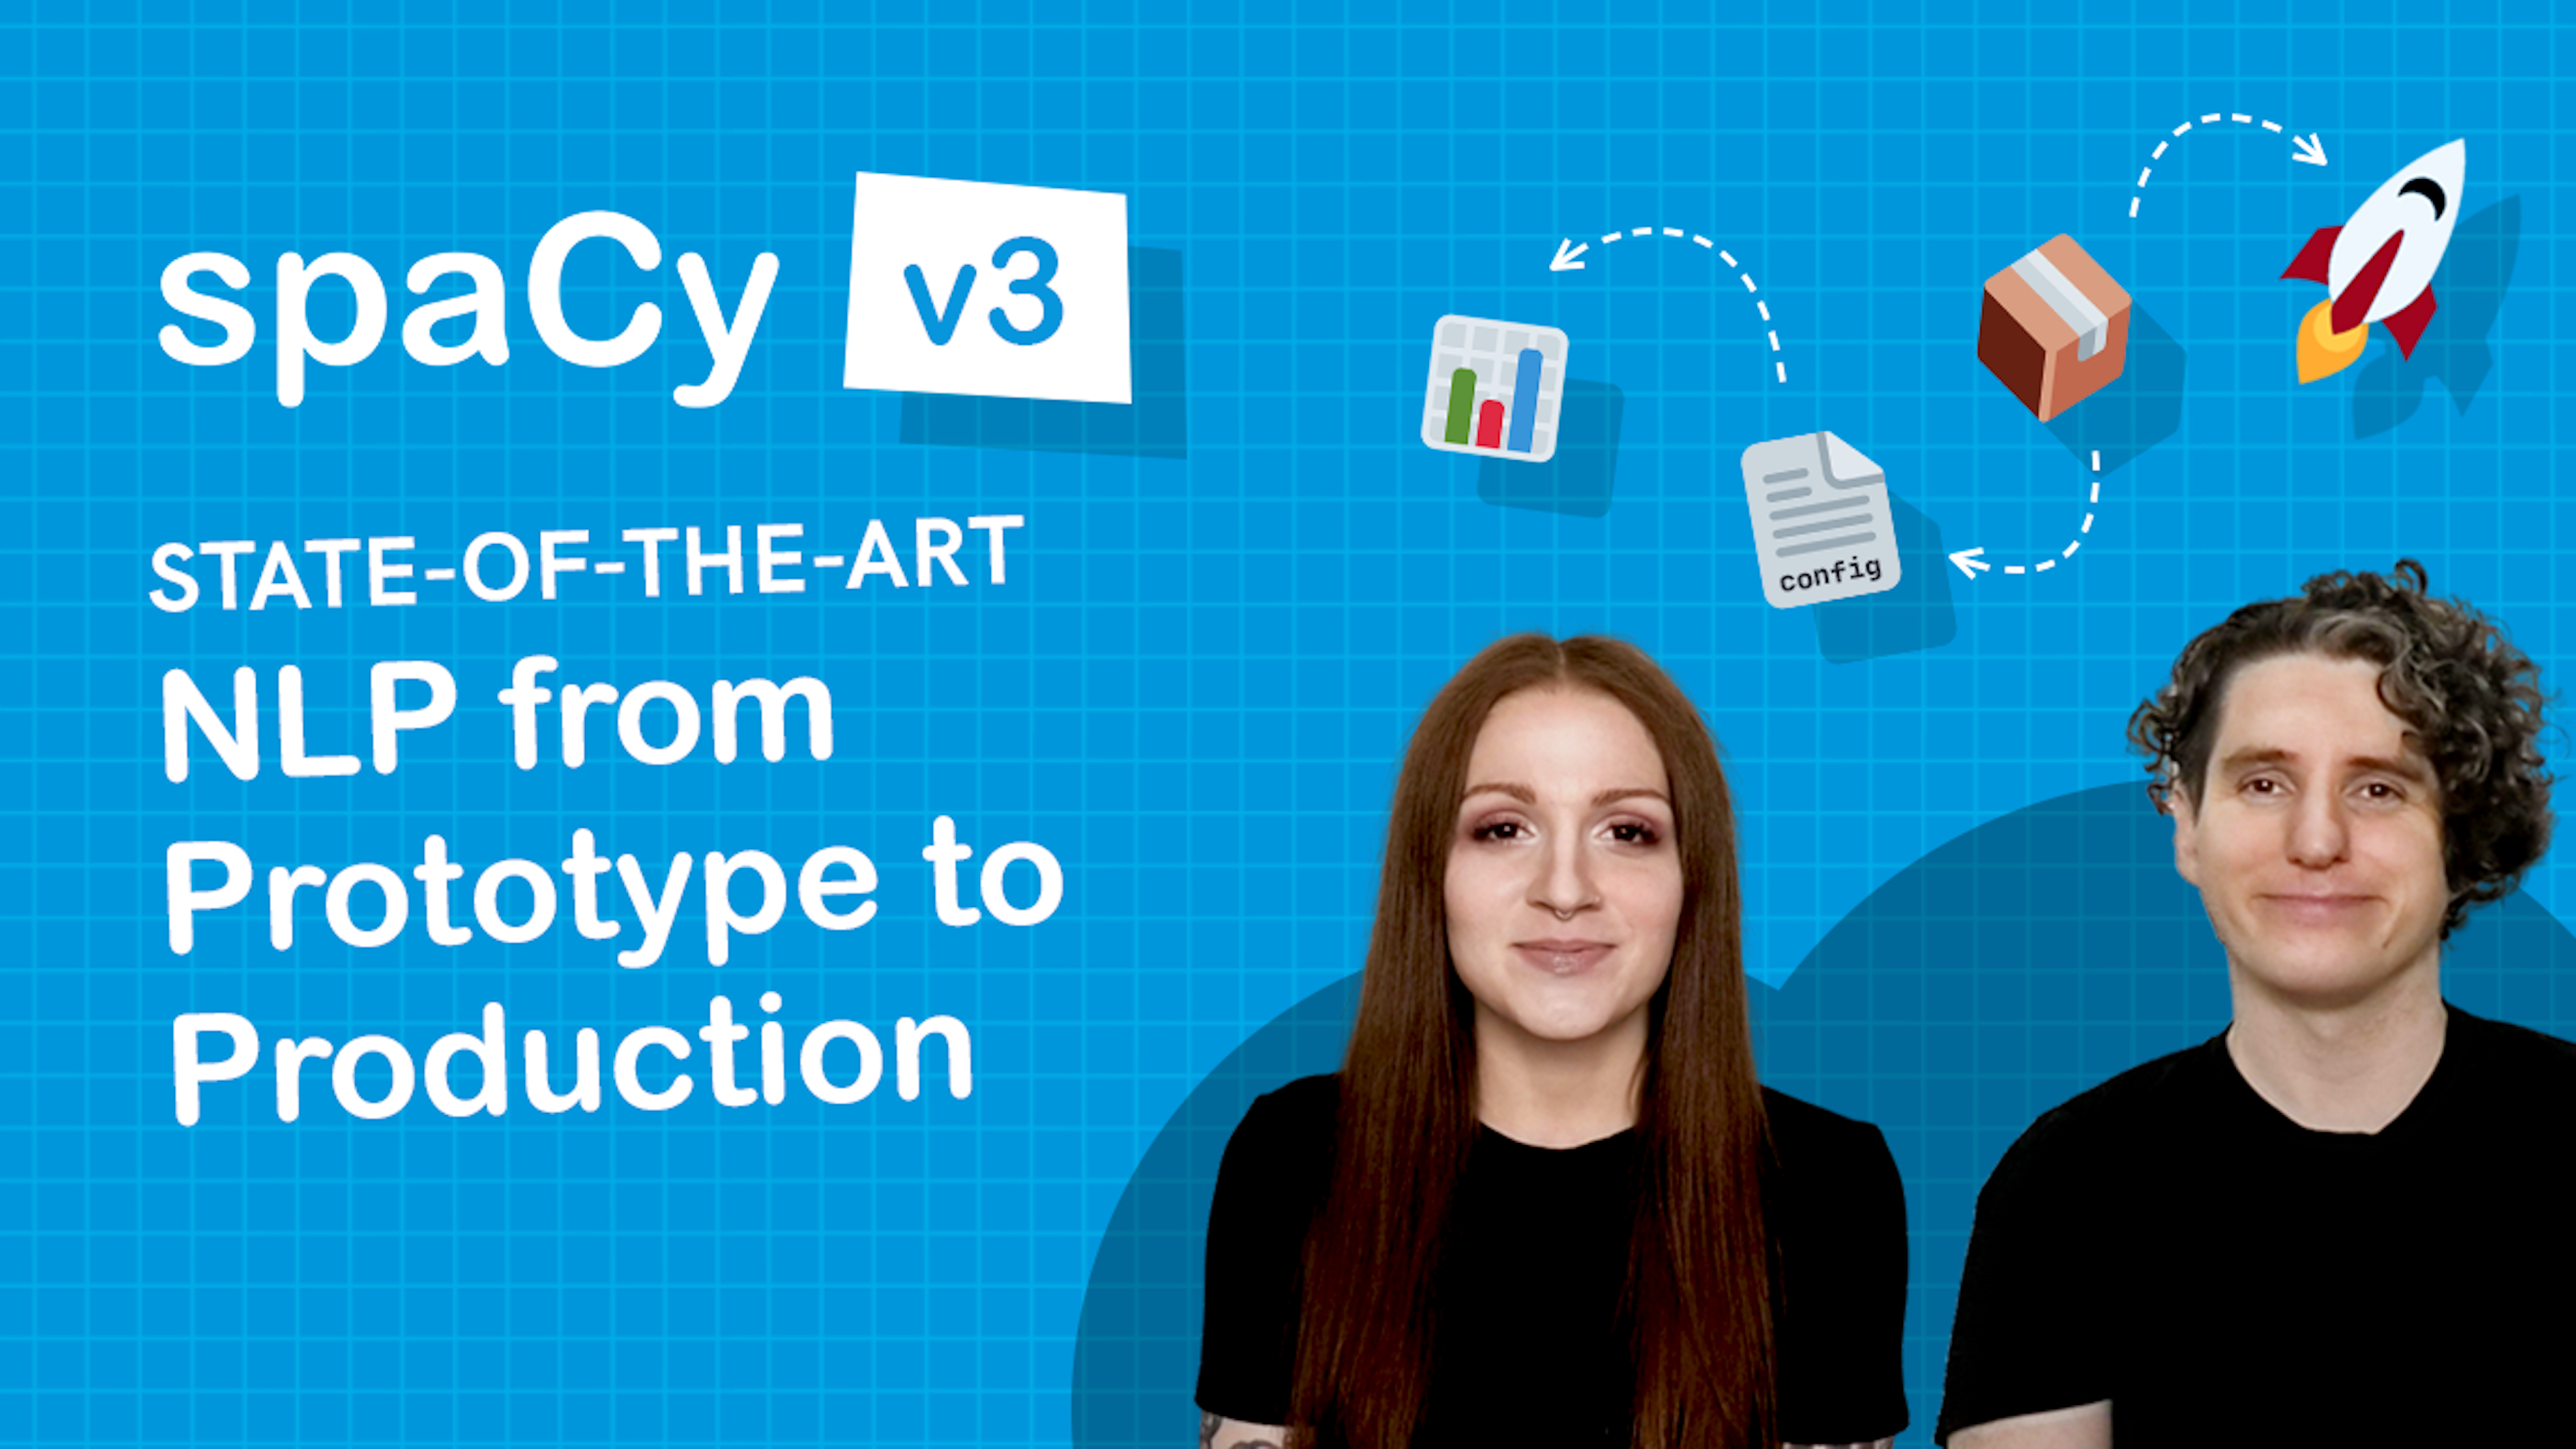 spaCy v3: State-of-the-art NLP from Prototype to Production